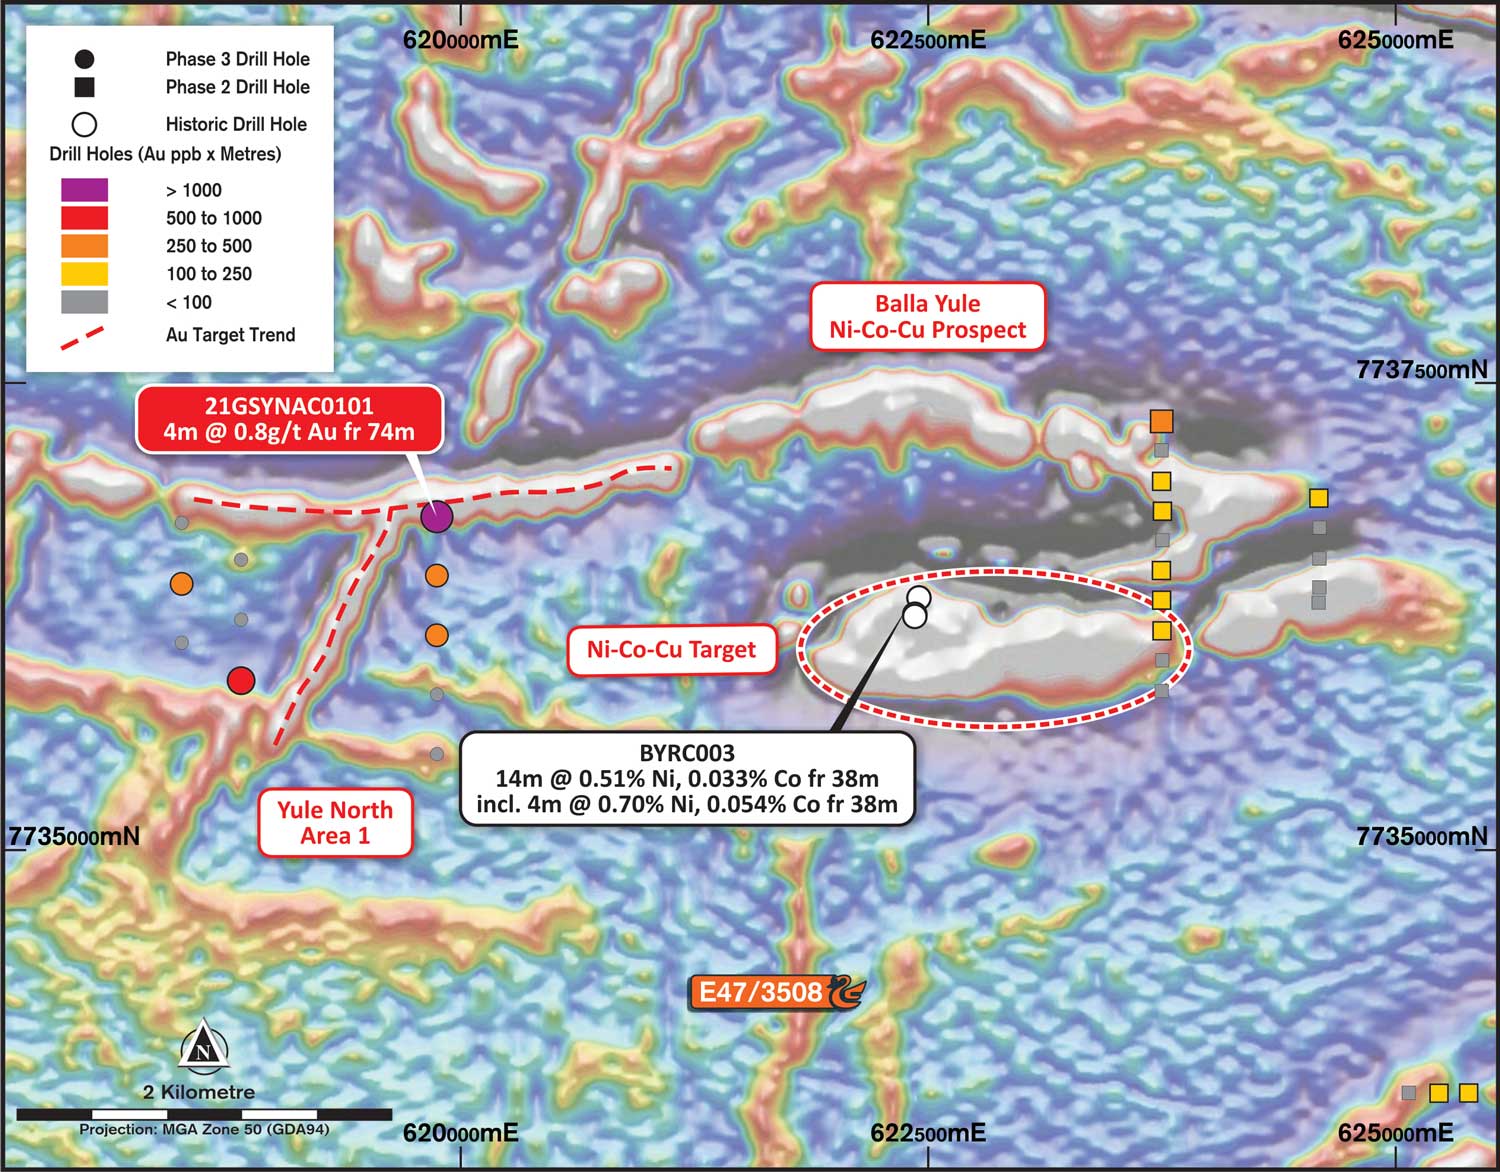 Yule North plan showing significant gold results near Balla Yule Ni-Co-Cu prospect